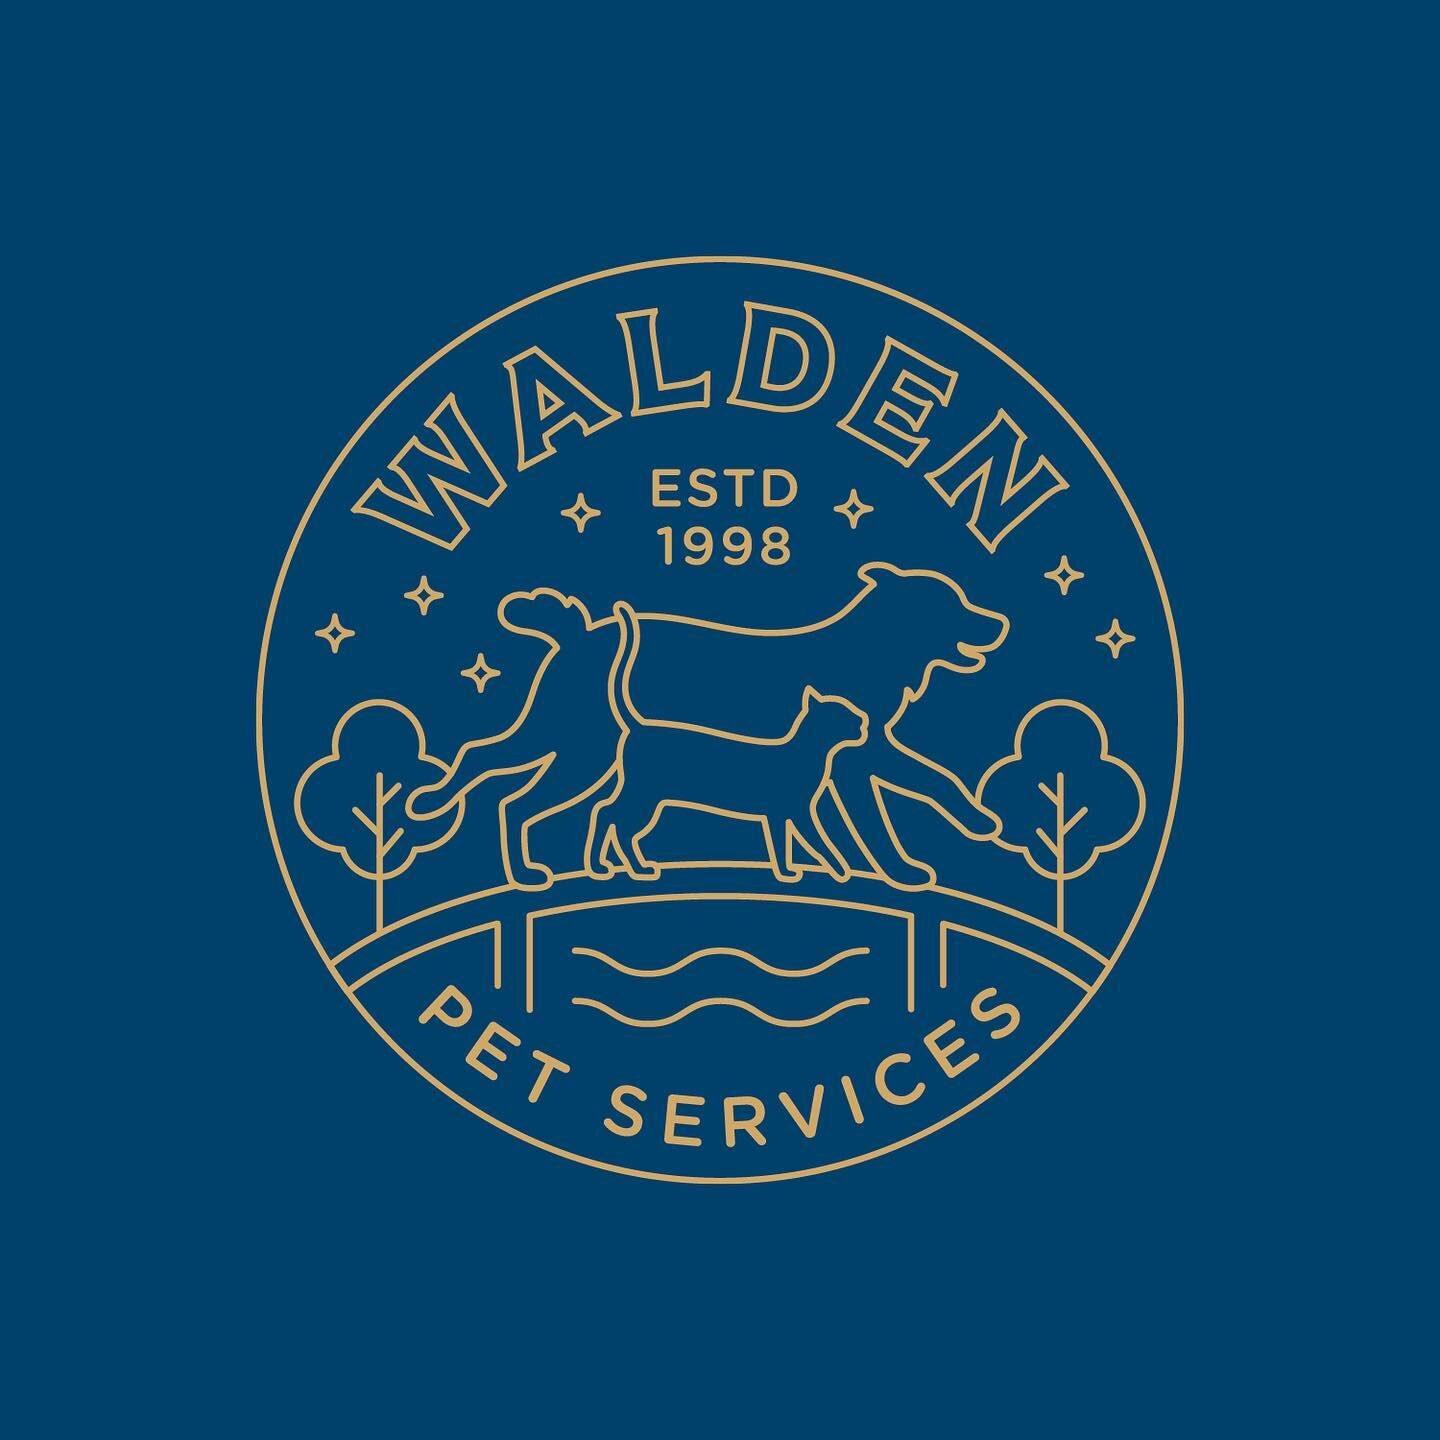 Fresh look for @waldenpet &mdash; a Concord, MA dog walking and pet care provider in its 25th year &mdash; to celebrate and elevate the brand its clients already know and love!
.
.
.
#waldenpet #waldenpetservices #concordma #concordmassachusetts #nor